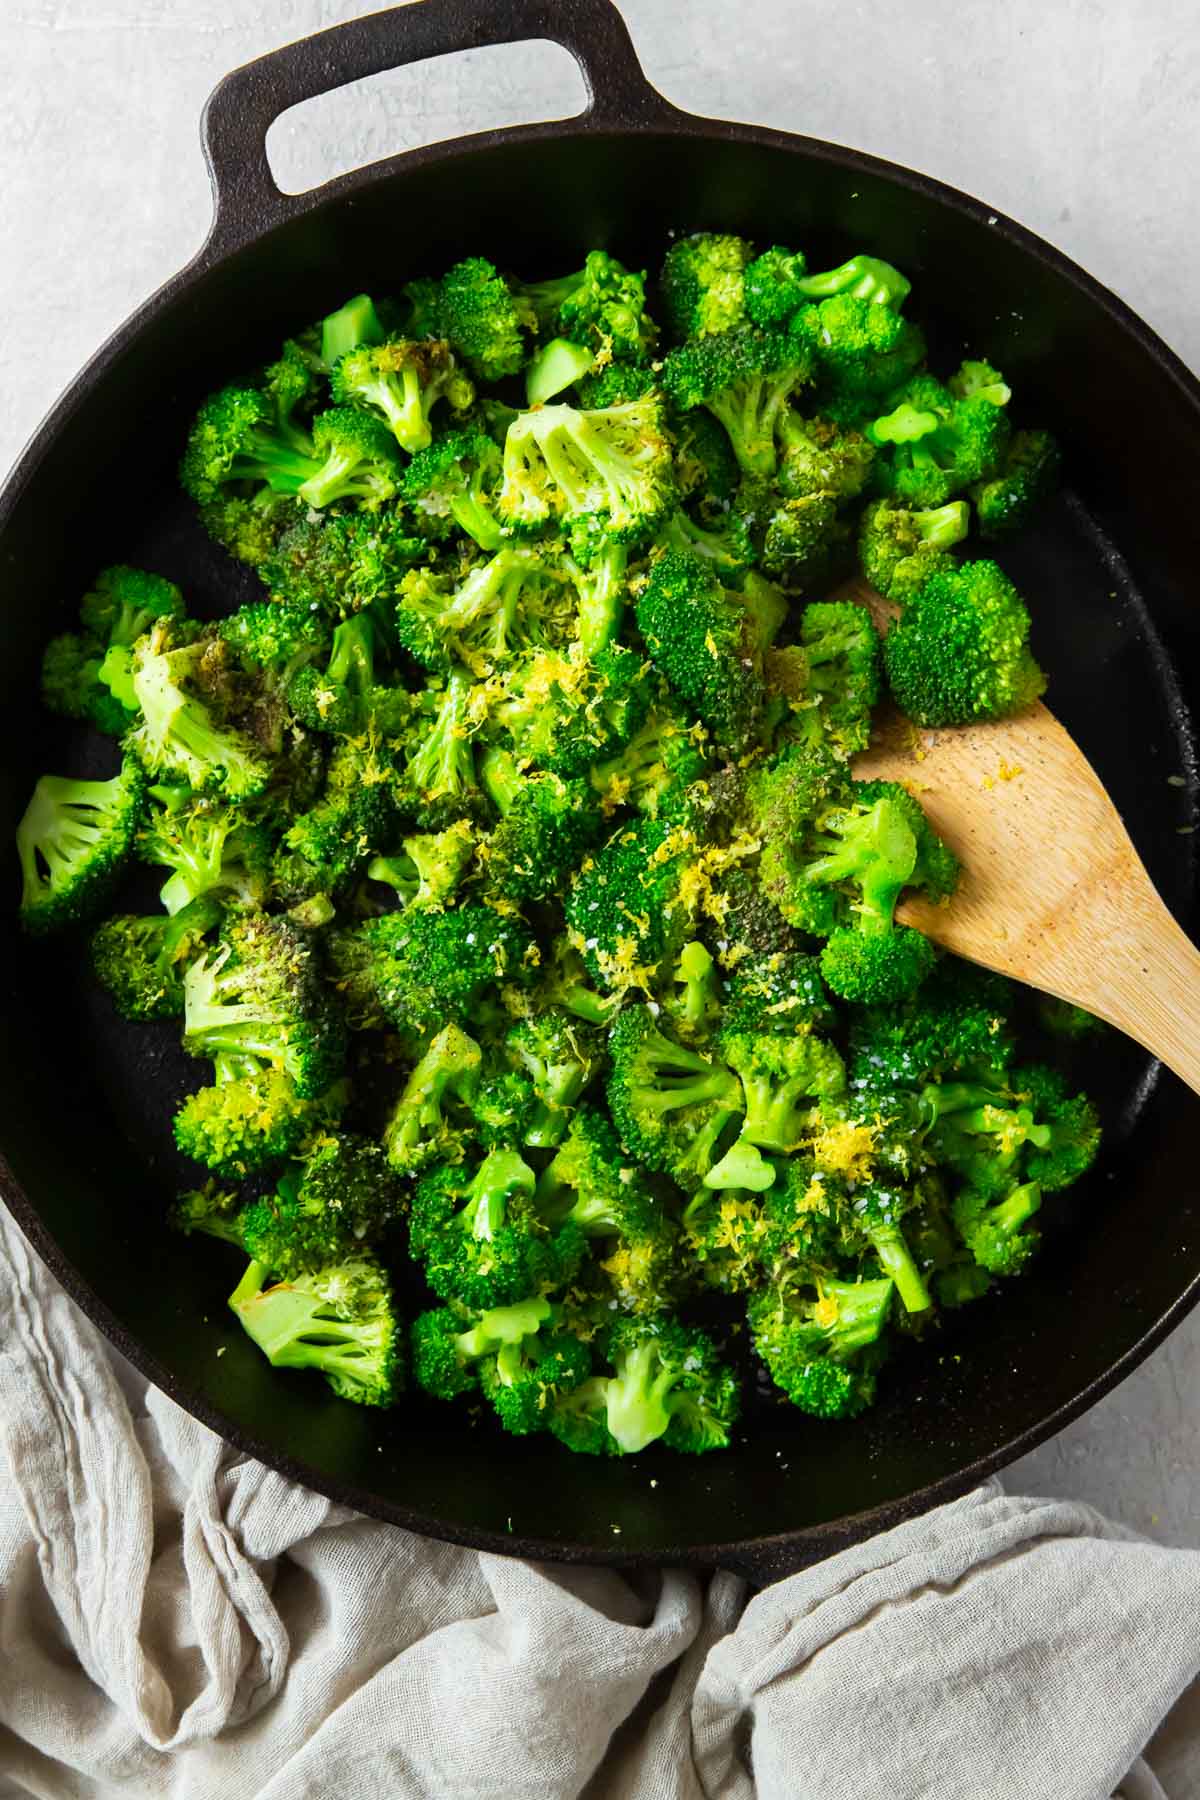 Sauteed broccoli in a cast iron skillet with wooden spatula.